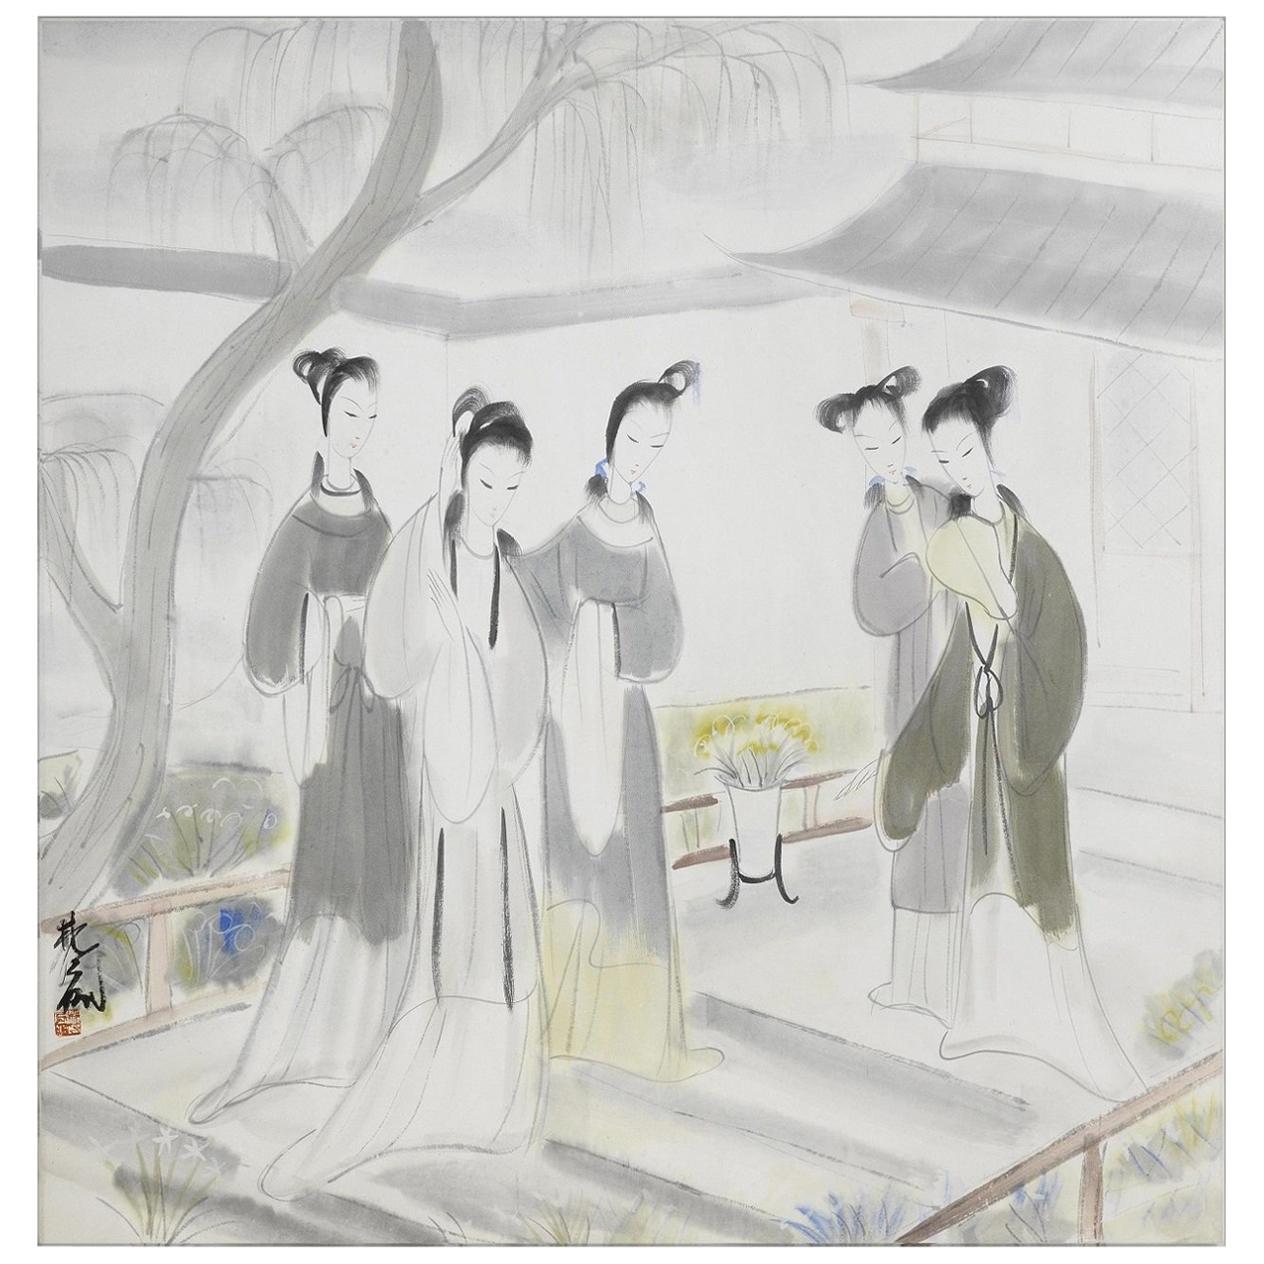 Gathering of Concubine, After Qing Dynasty Revival Artist Lin Fengmian For Sale